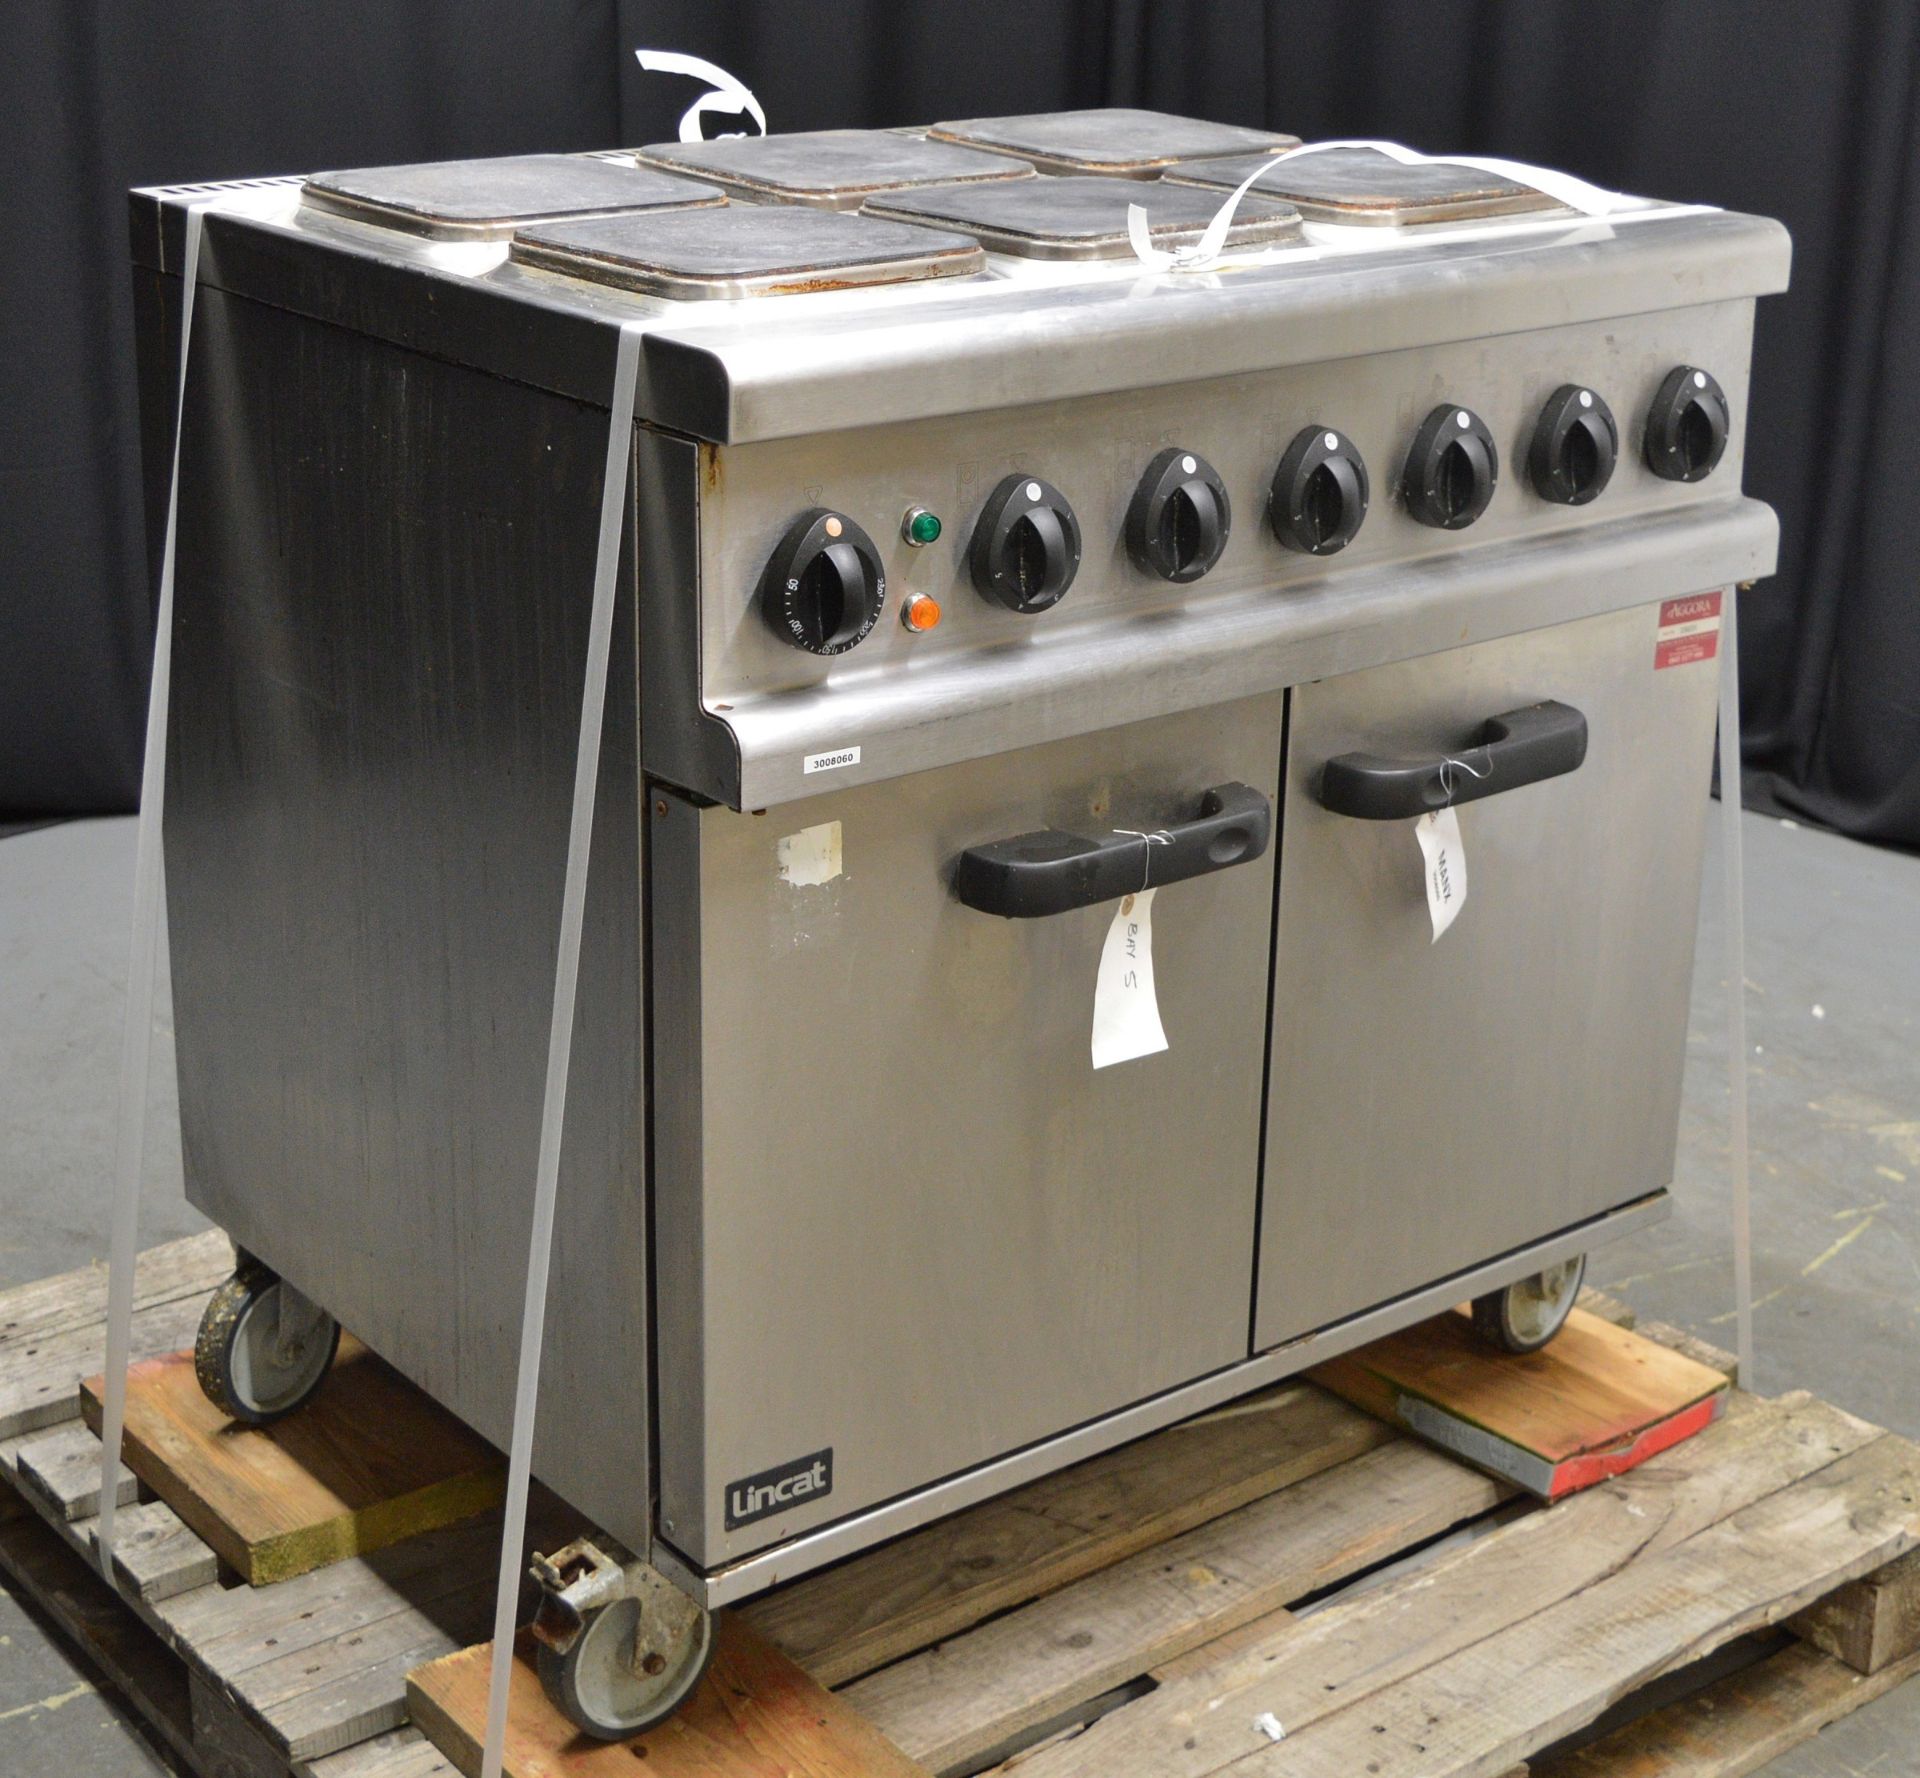 Lincat OE7008 6 Plate All Electric Range Oven - 440v - Image 2 of 7